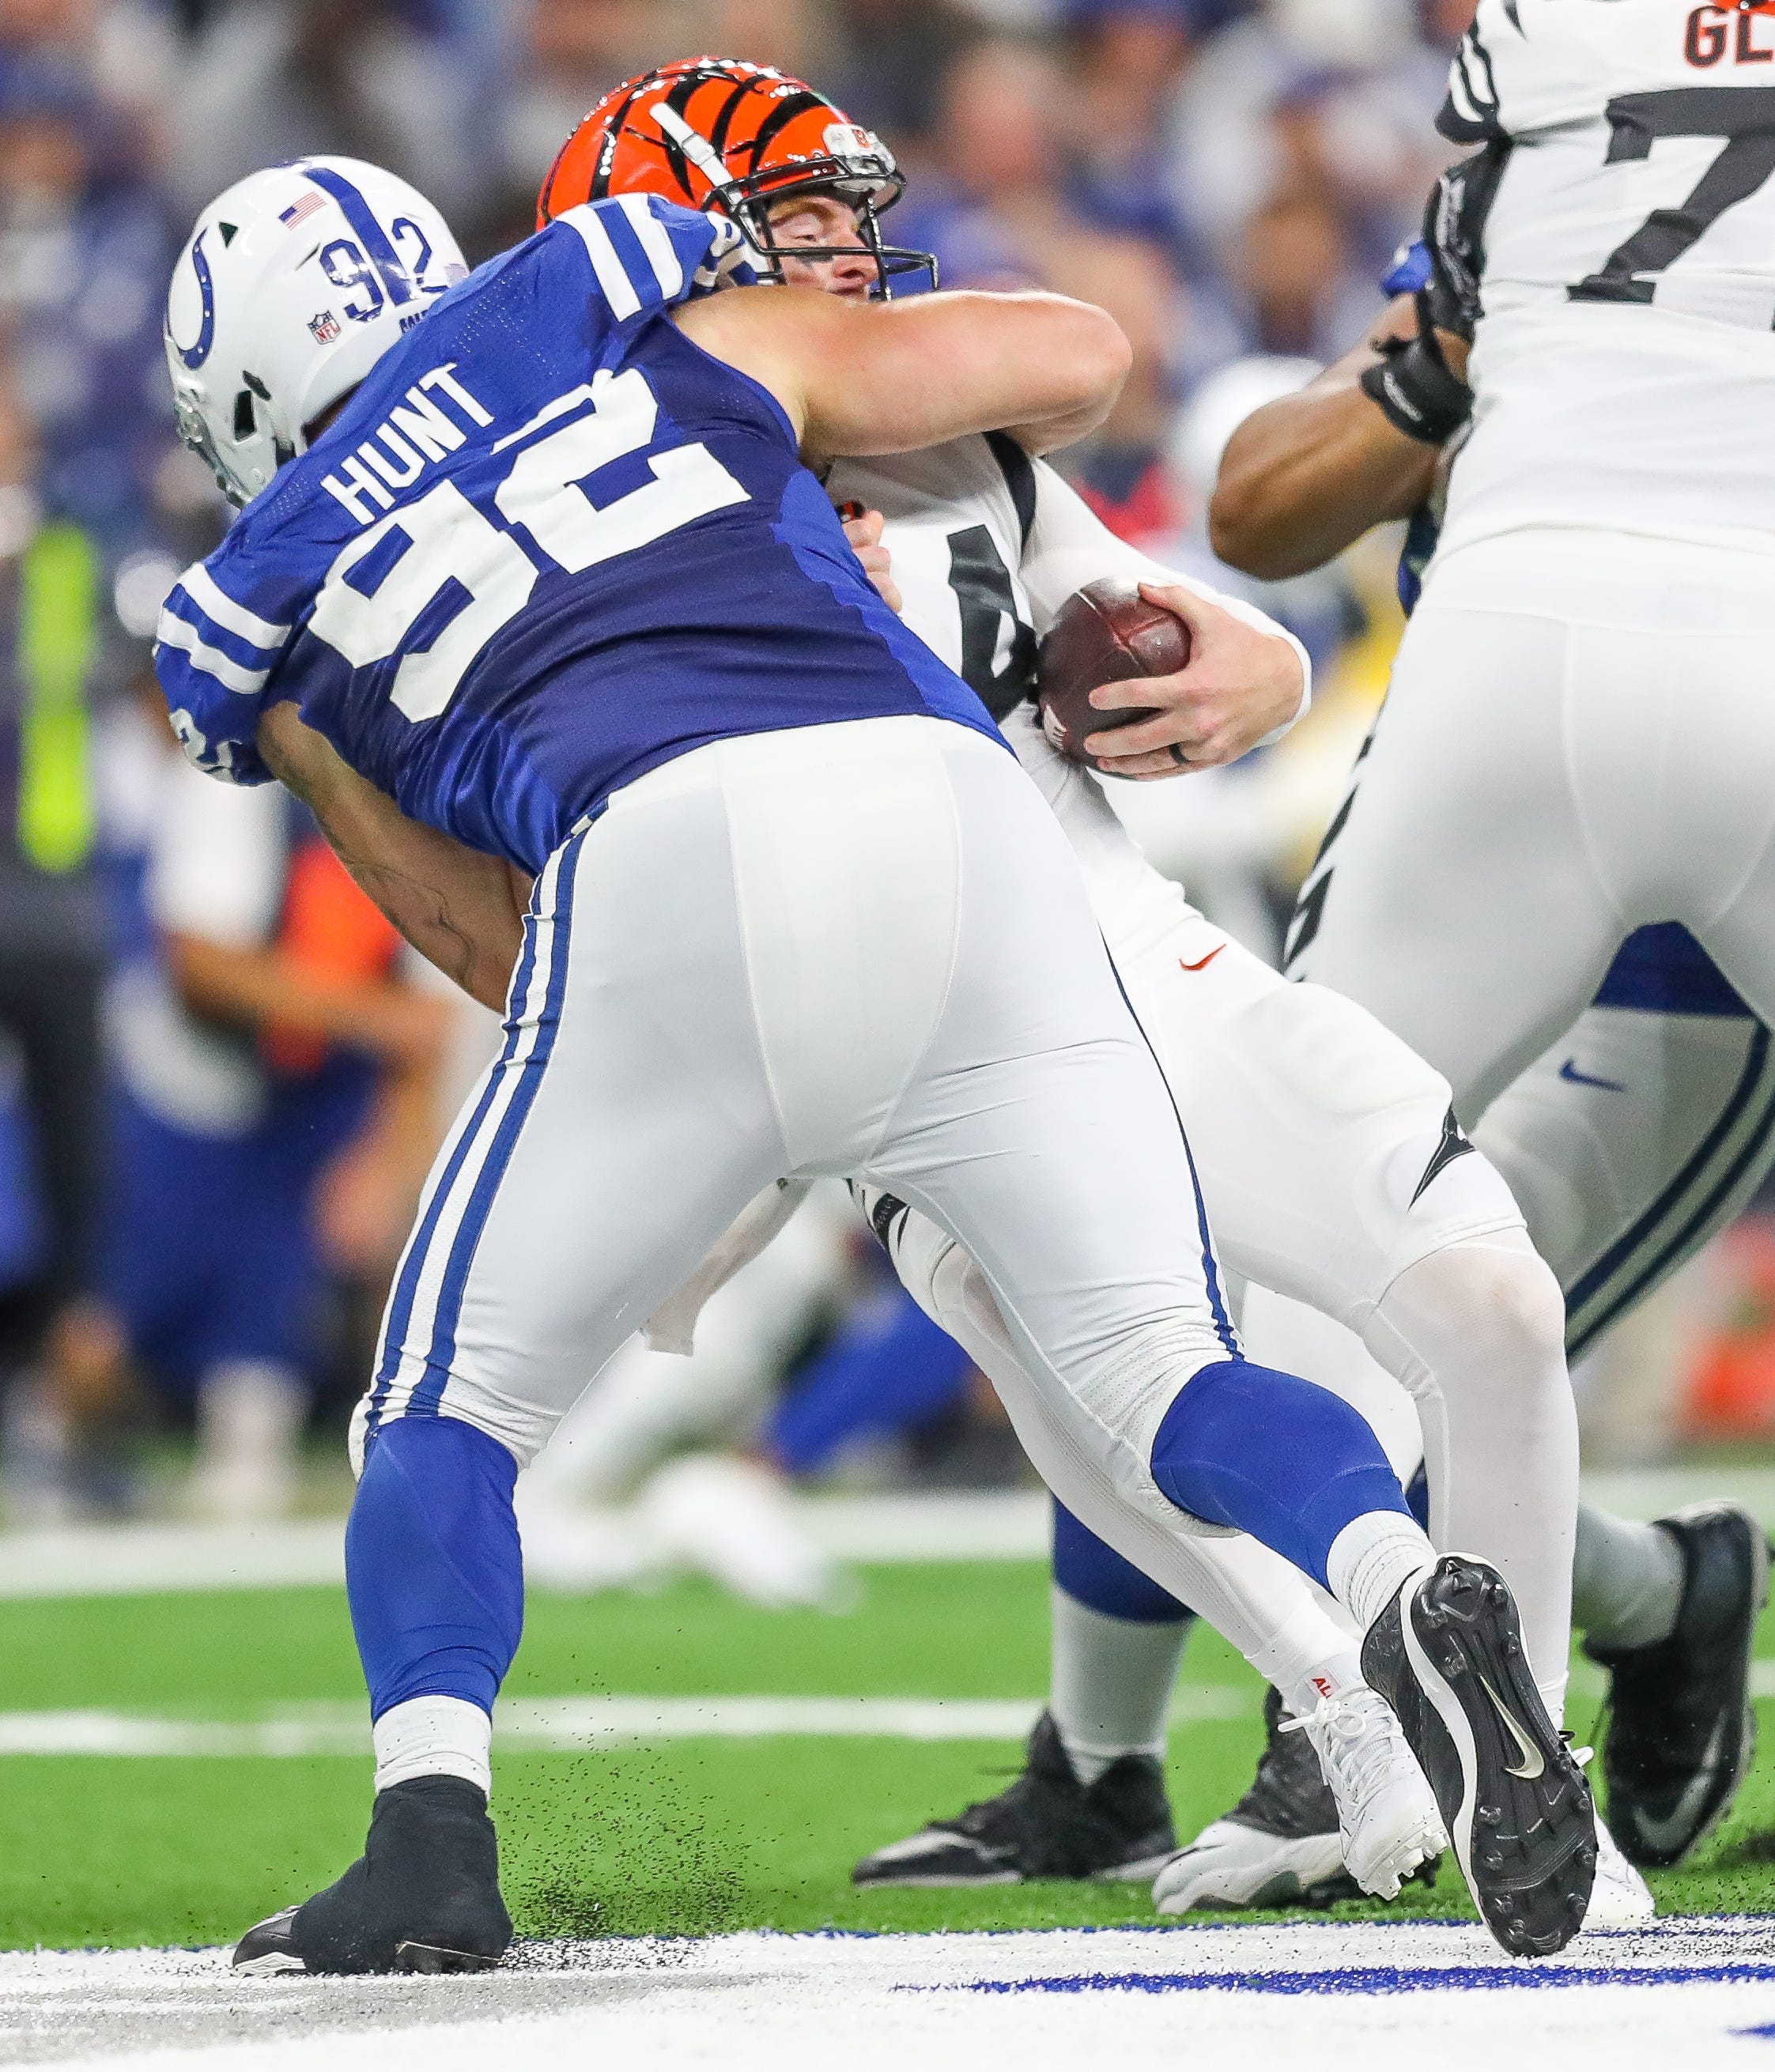 Margus Hunt had the game of his life Sunday. But he isn't satisfied.